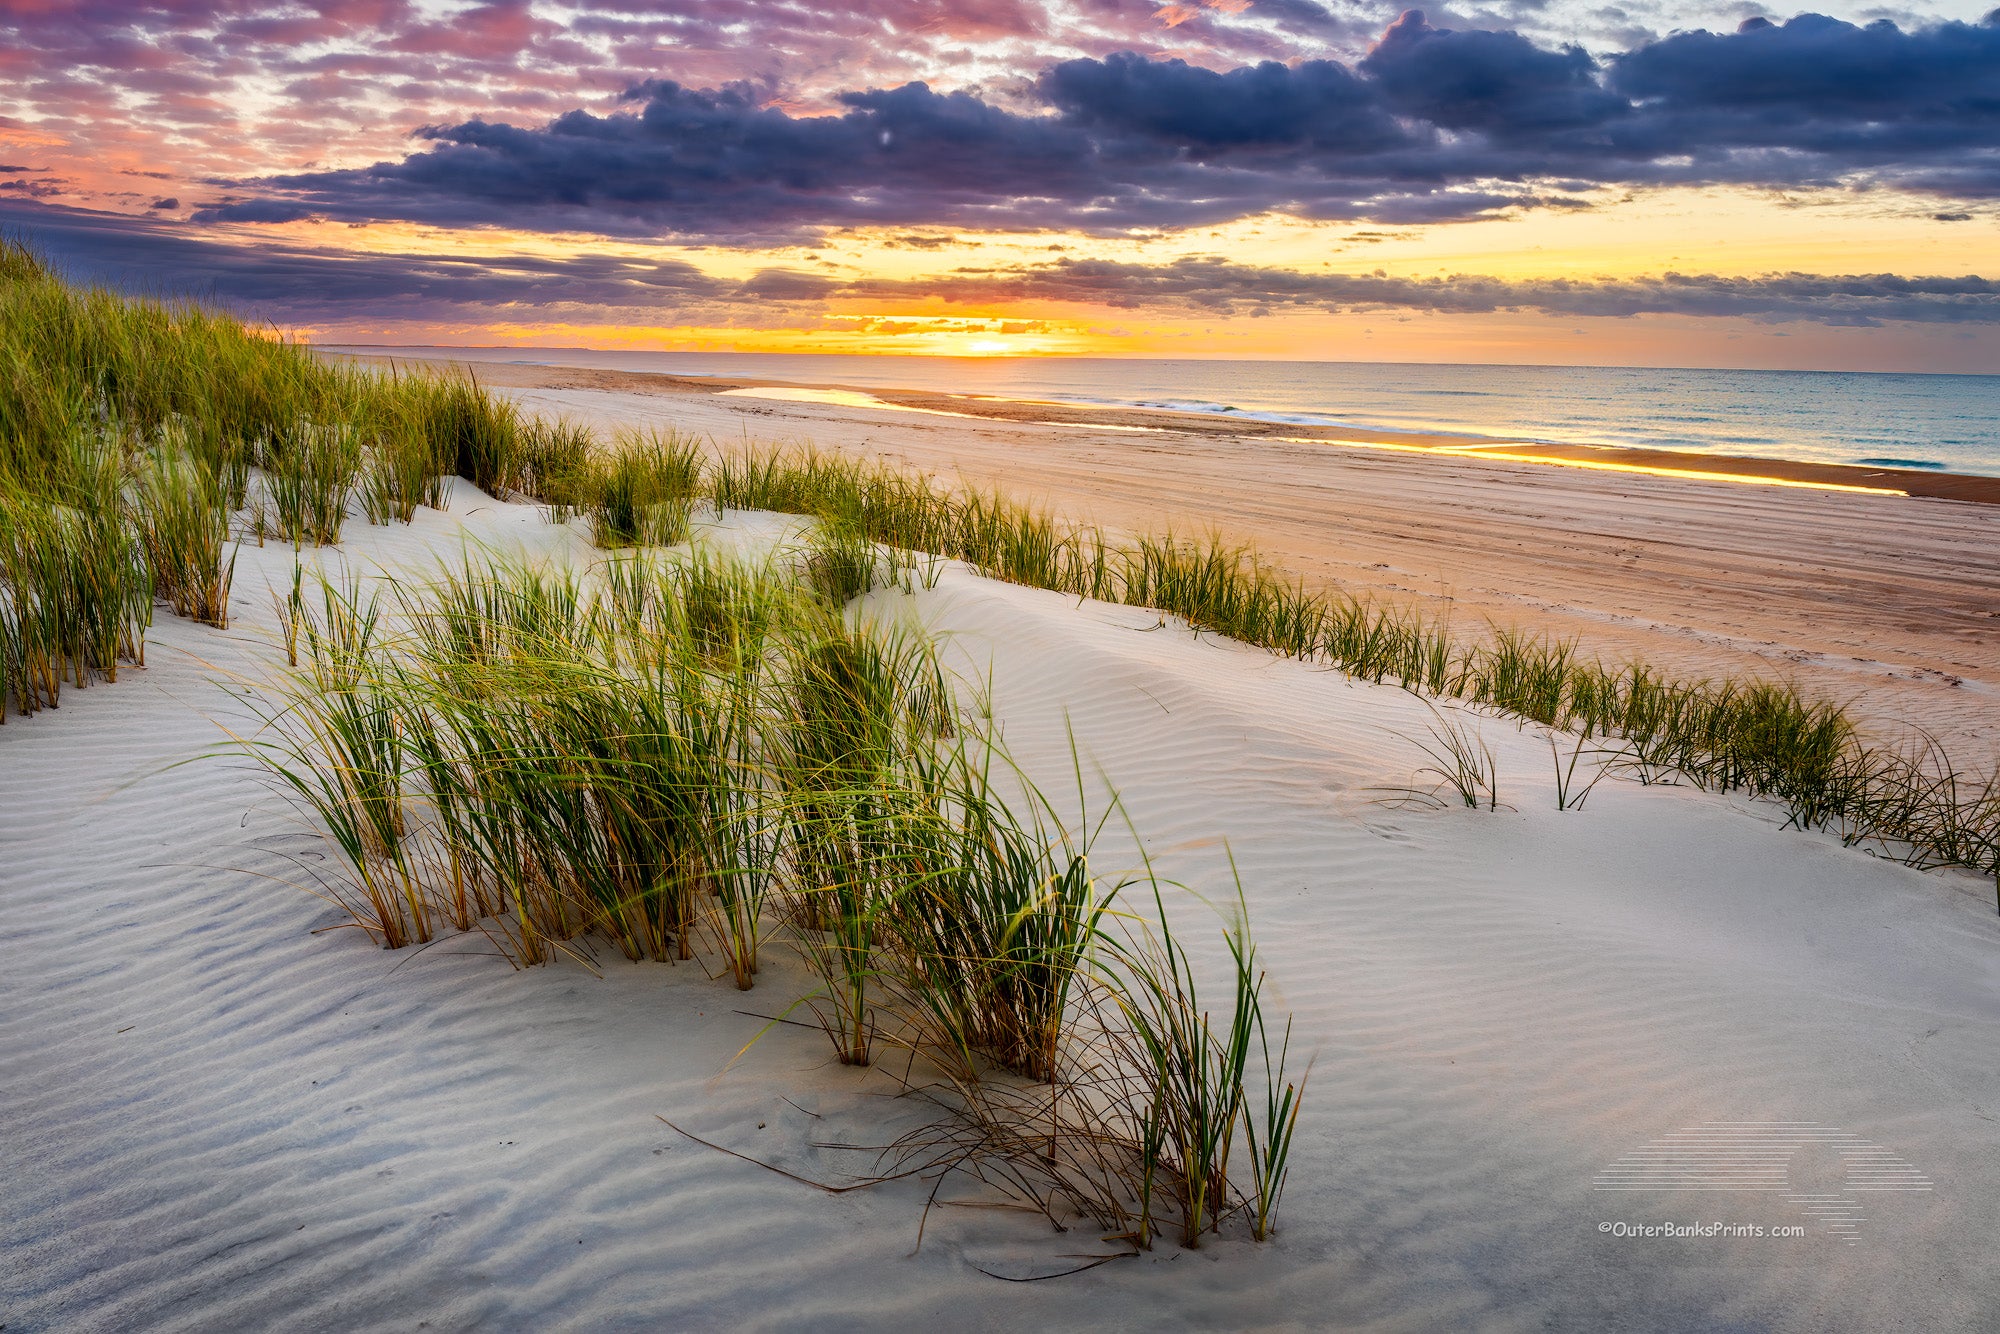 A early summer morning on the dunes in Frisco at Cape Hatteras National Seashore on the Outer Banks of North Carolina.